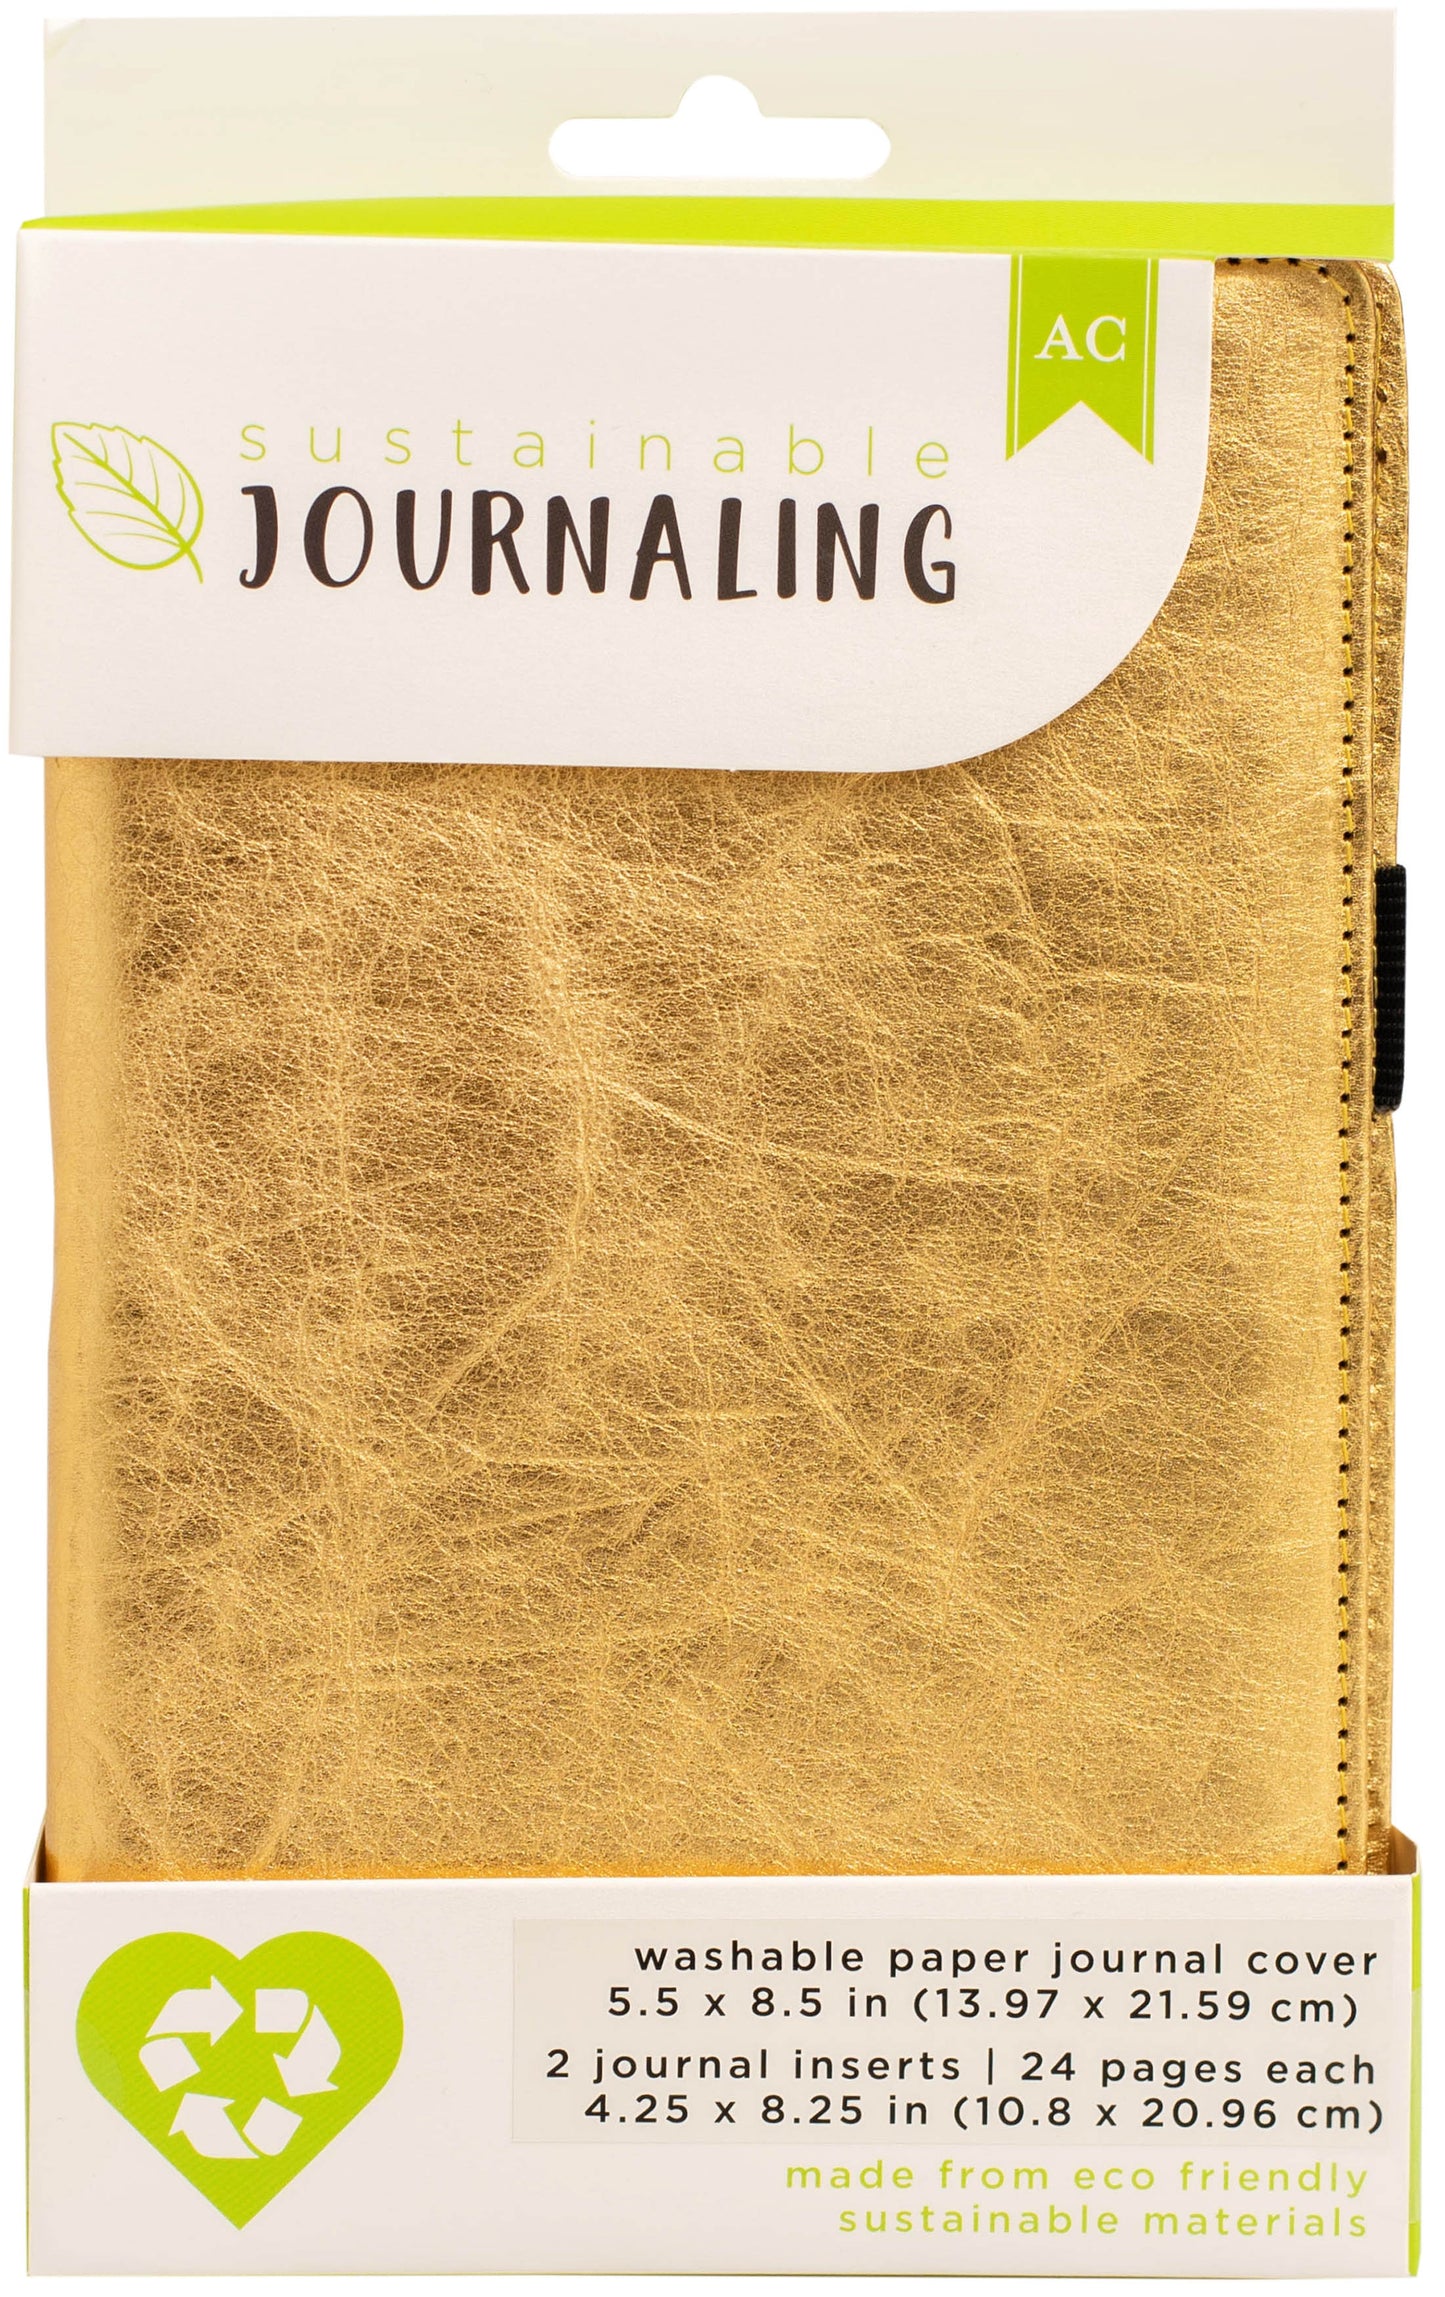 AC Sustainable Journaling Washable Paper Journal 5.5"X8.5"-Gold, W/2 Inserts (24 Pages Each)